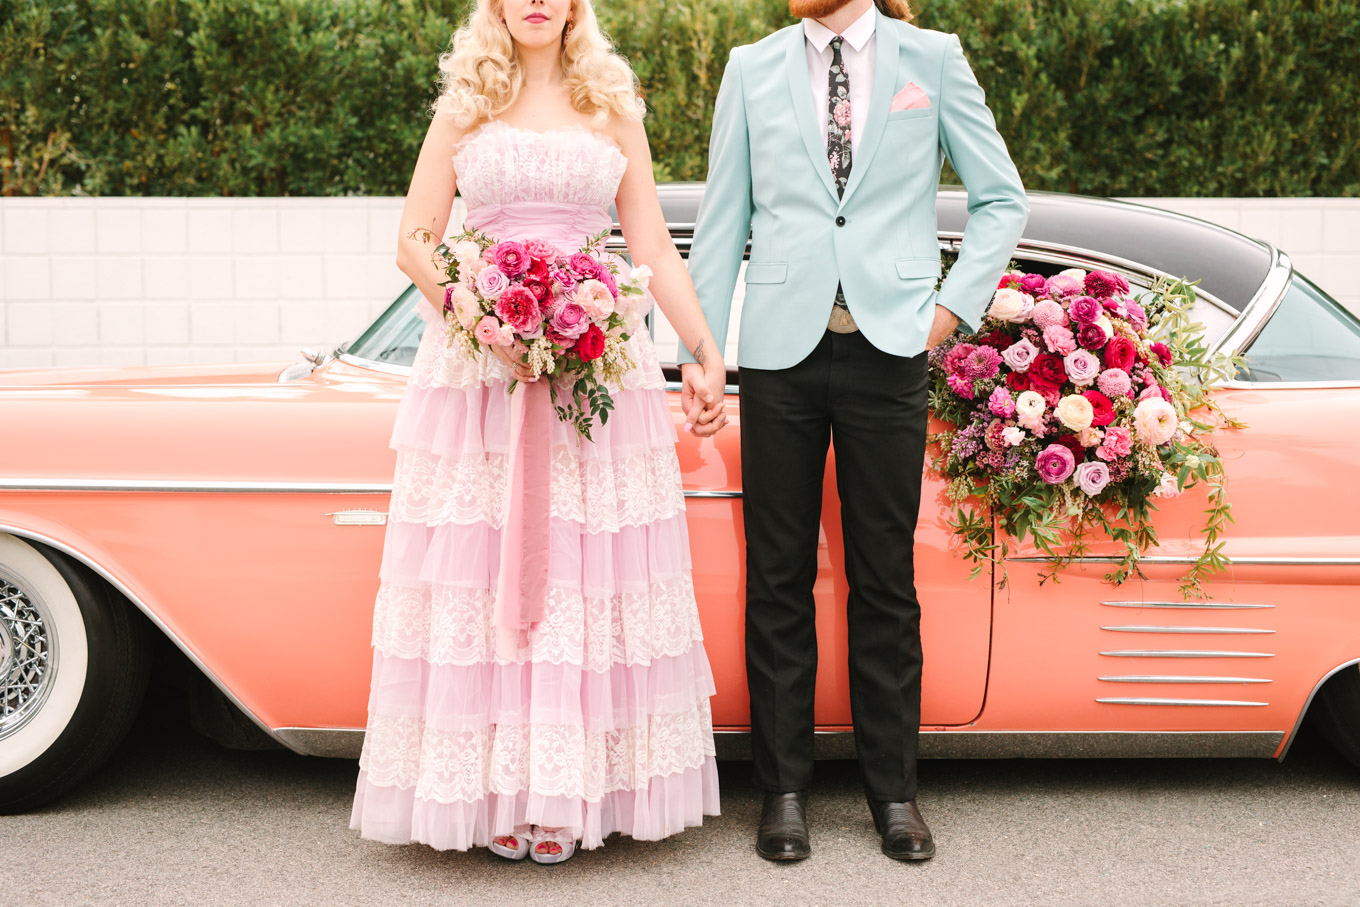 Modern vintage-inspired Palm Springs engagement session with a 1960s pink Cadillac, retro clothing, and flowers by Shindig Chic. | Colorful and elevated wedding inspiration for fun-loving couples in Southern California | #engagementsession #PalmSpringsengagement #vintageweddingdress #floralcar #pinkcar   Source: Mary Costa Photography | Los Angeles